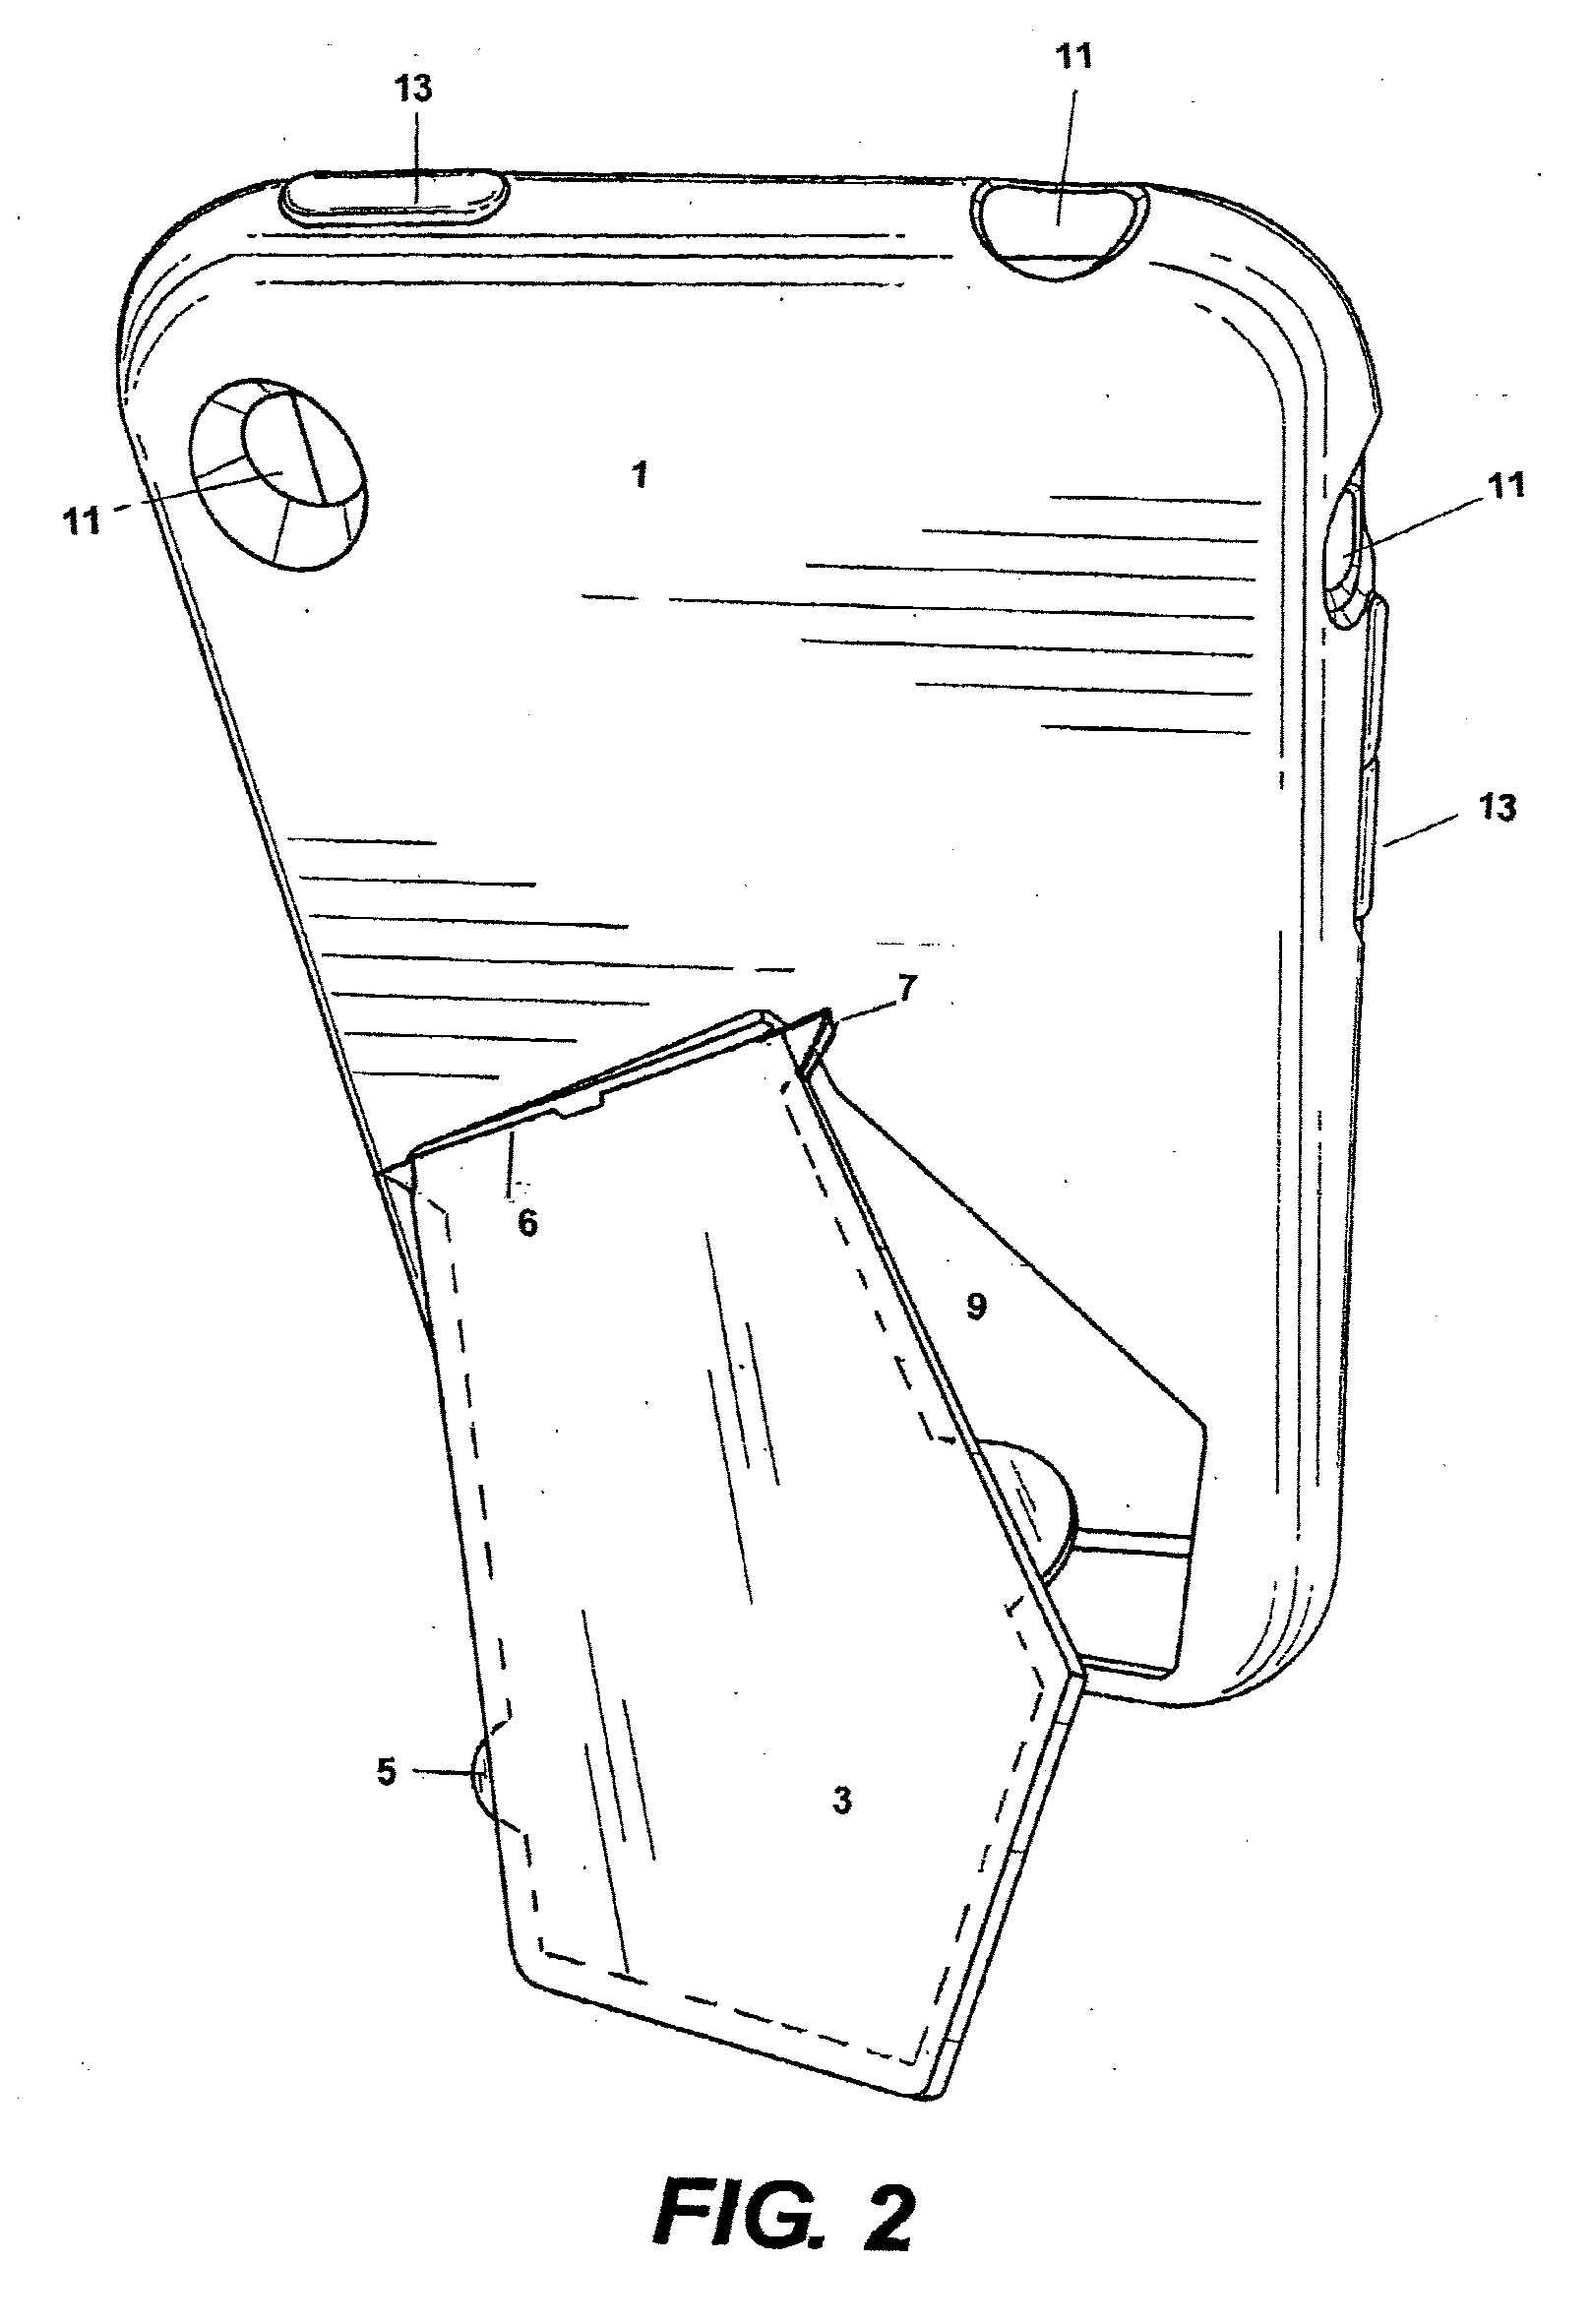 Integrated Frame/Stand for Portable Electronic Devices